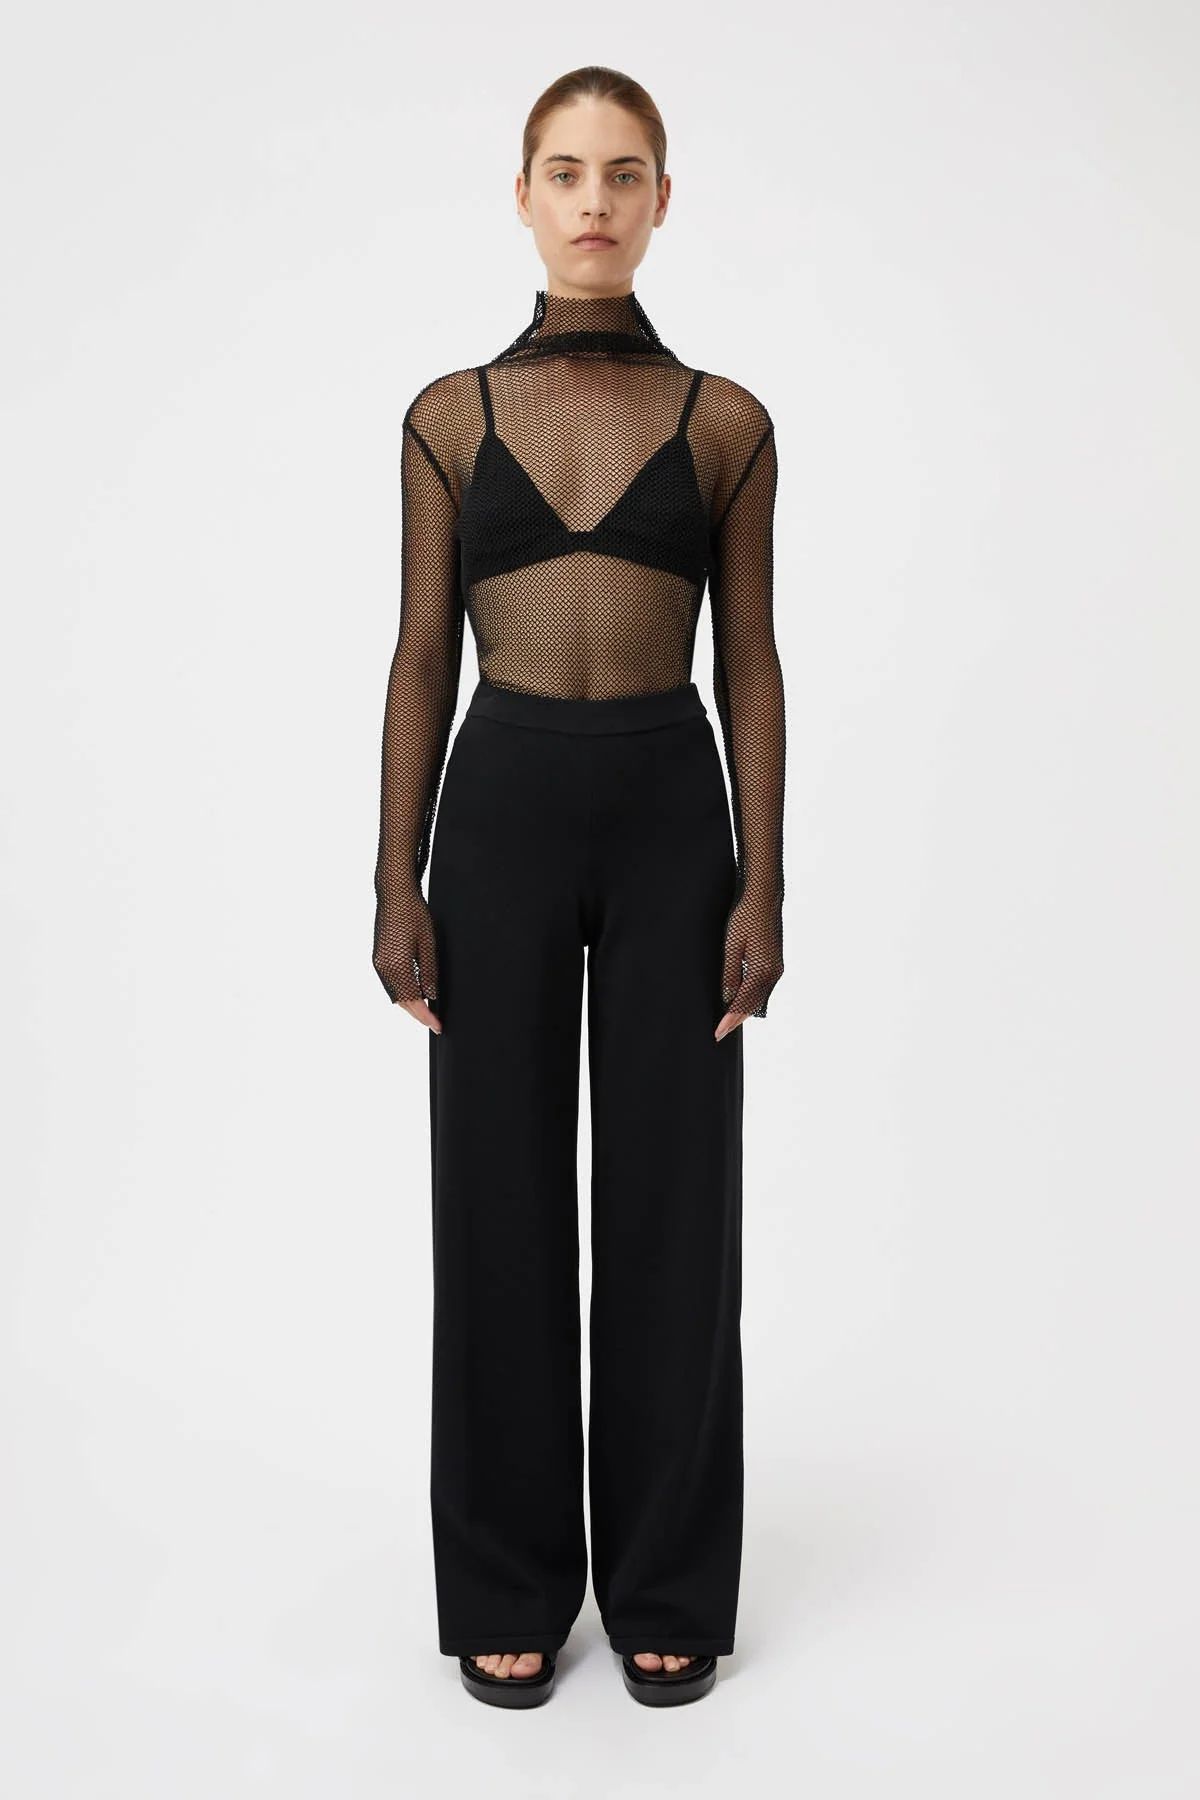 CAMILLA AND MARC Sloane Netted Top in Black. | Camilla and Marc